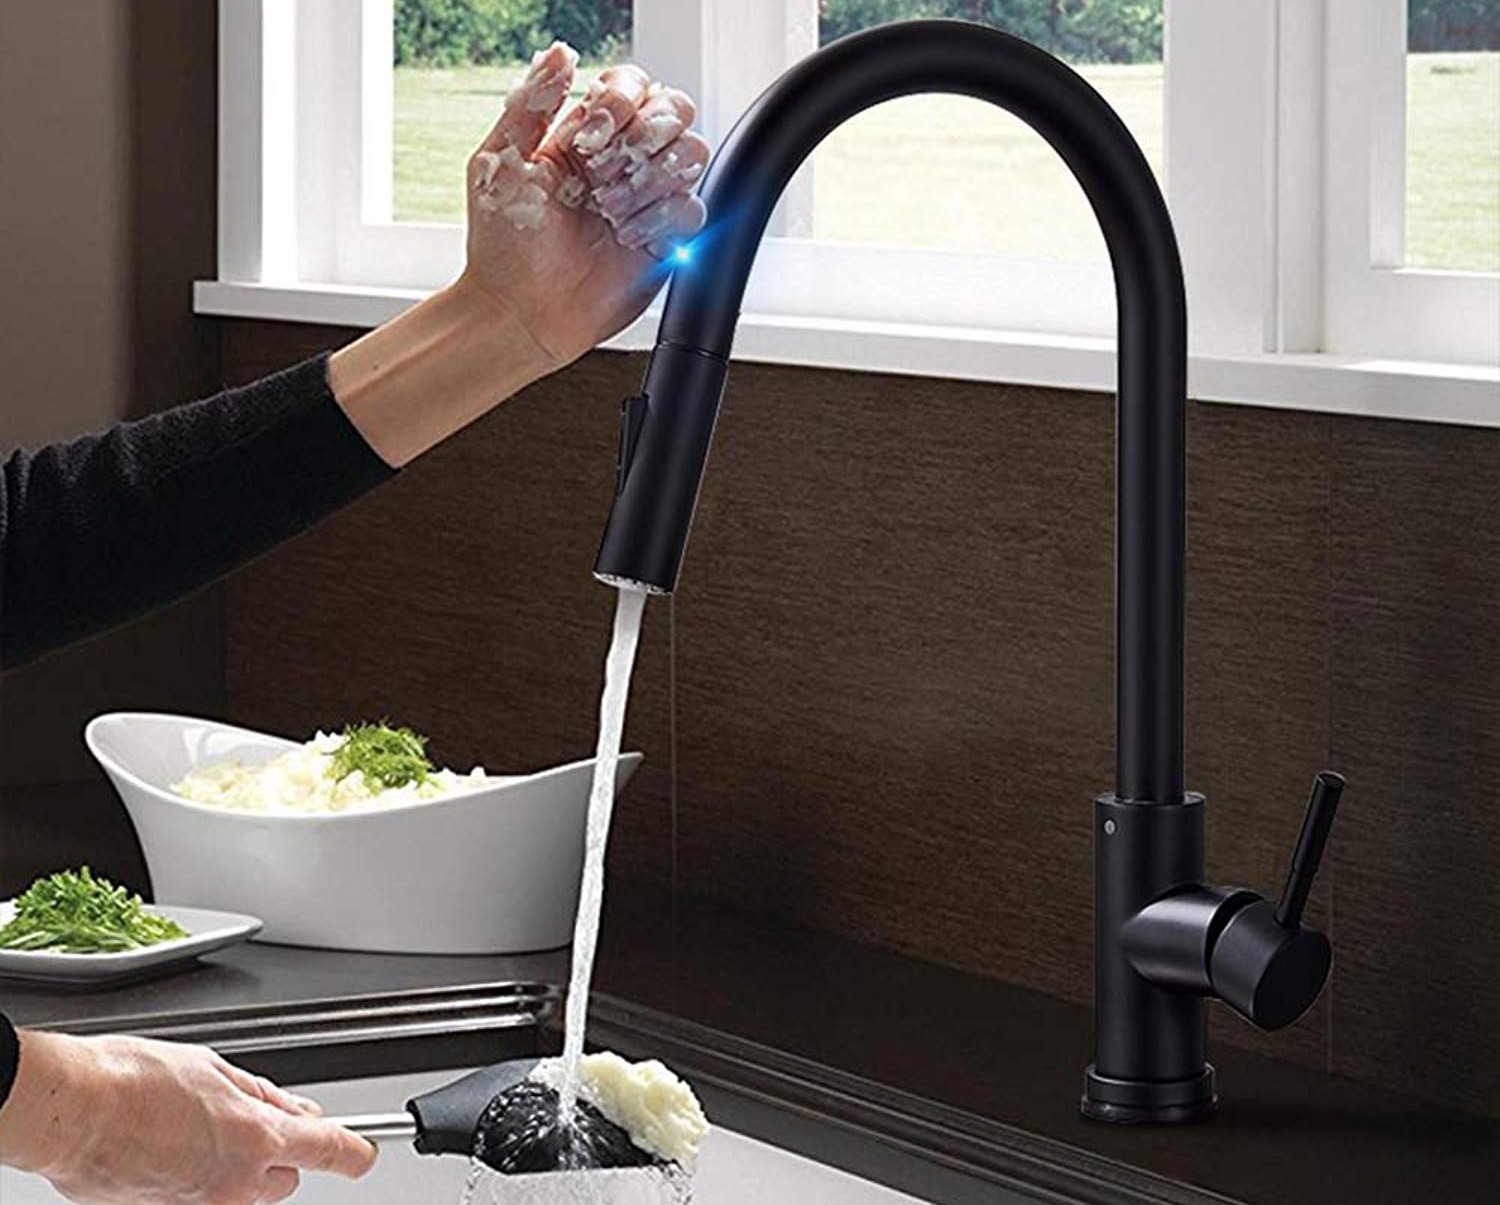 6 Best Kitchen Faucets Under 200 Dollars - Inexpensive and Well-Designed (2023)